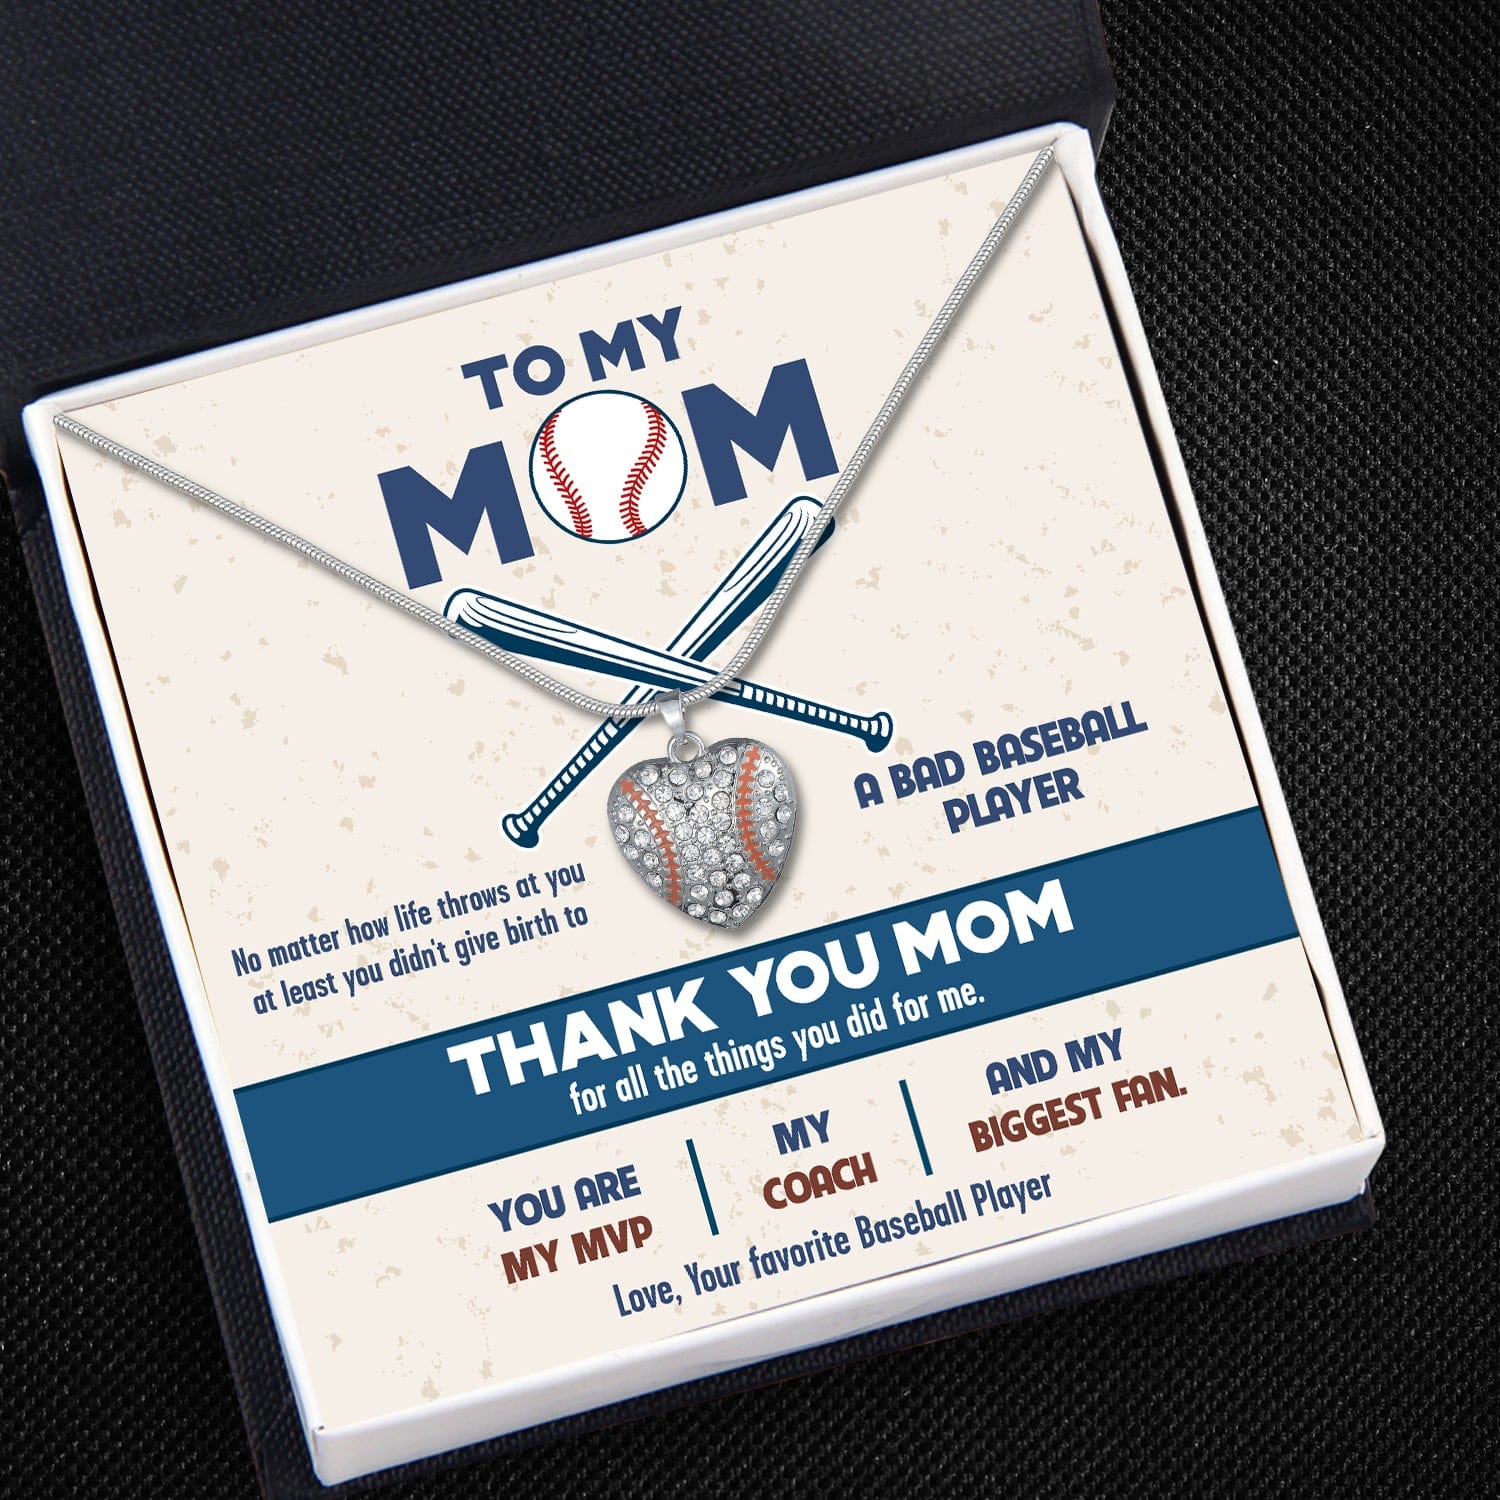 Baseball Heart Necklace - Baseball - To My Mom - You Are My Mvp, My Coach, And My Biggest Fan - Gnd19014